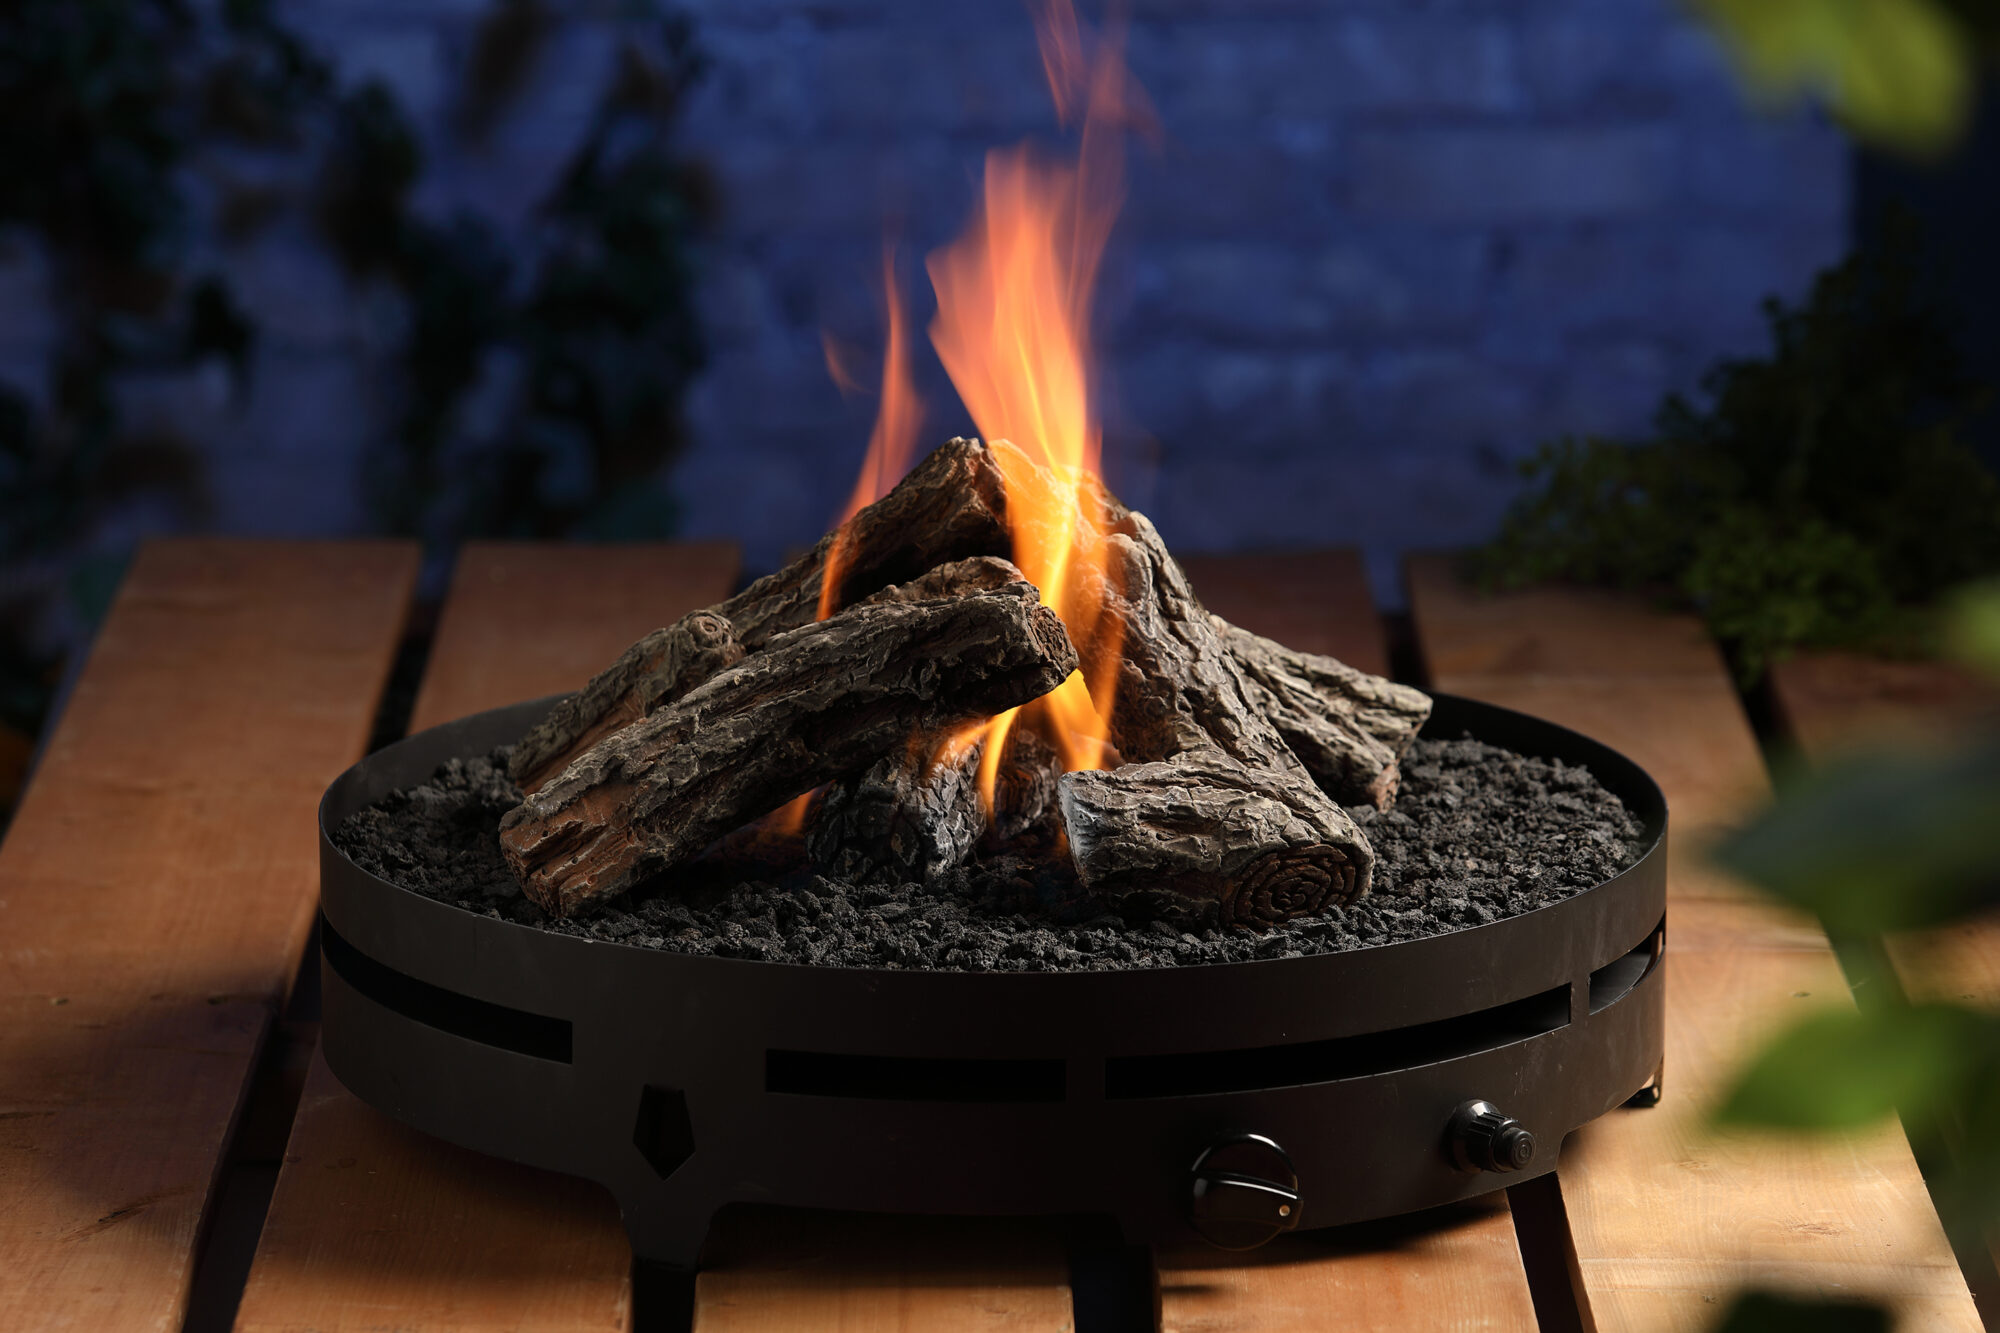 How To Convert A Propane Fire Pit To Natural Gas